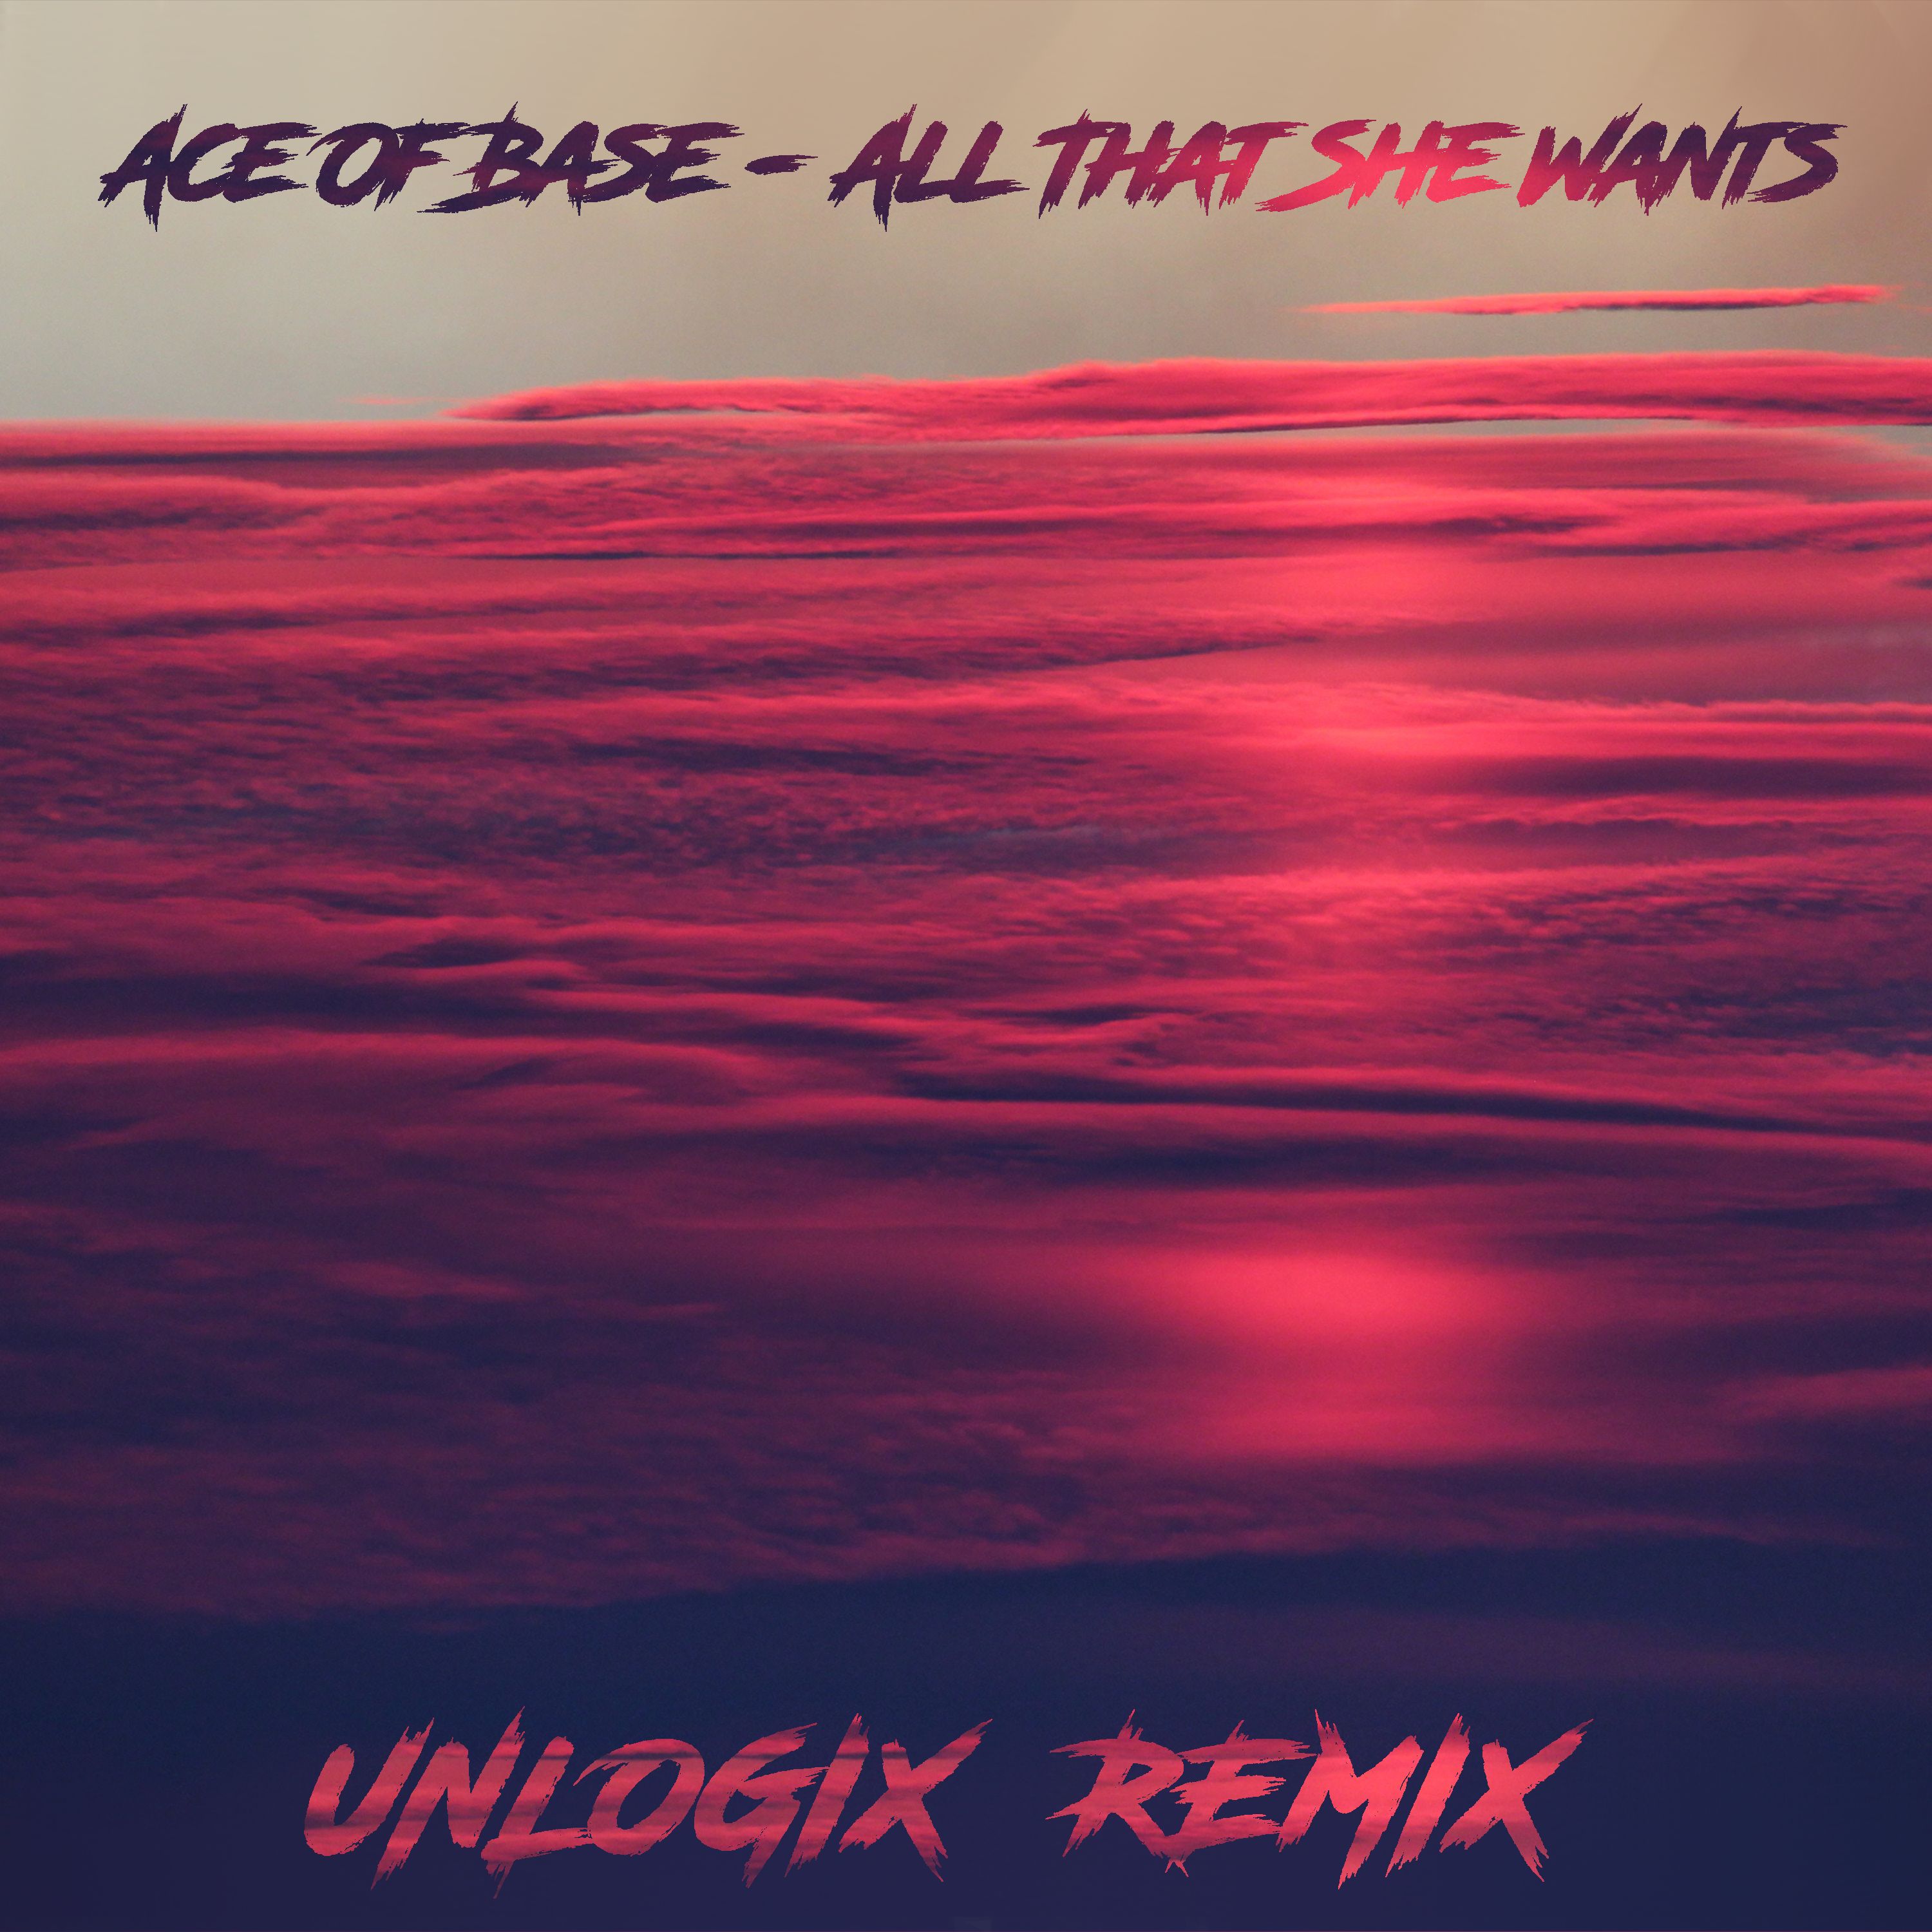 I-download Ace Of Base - All That She Wants ( Unlogix Remix ) "FREE DOWNLOAD"